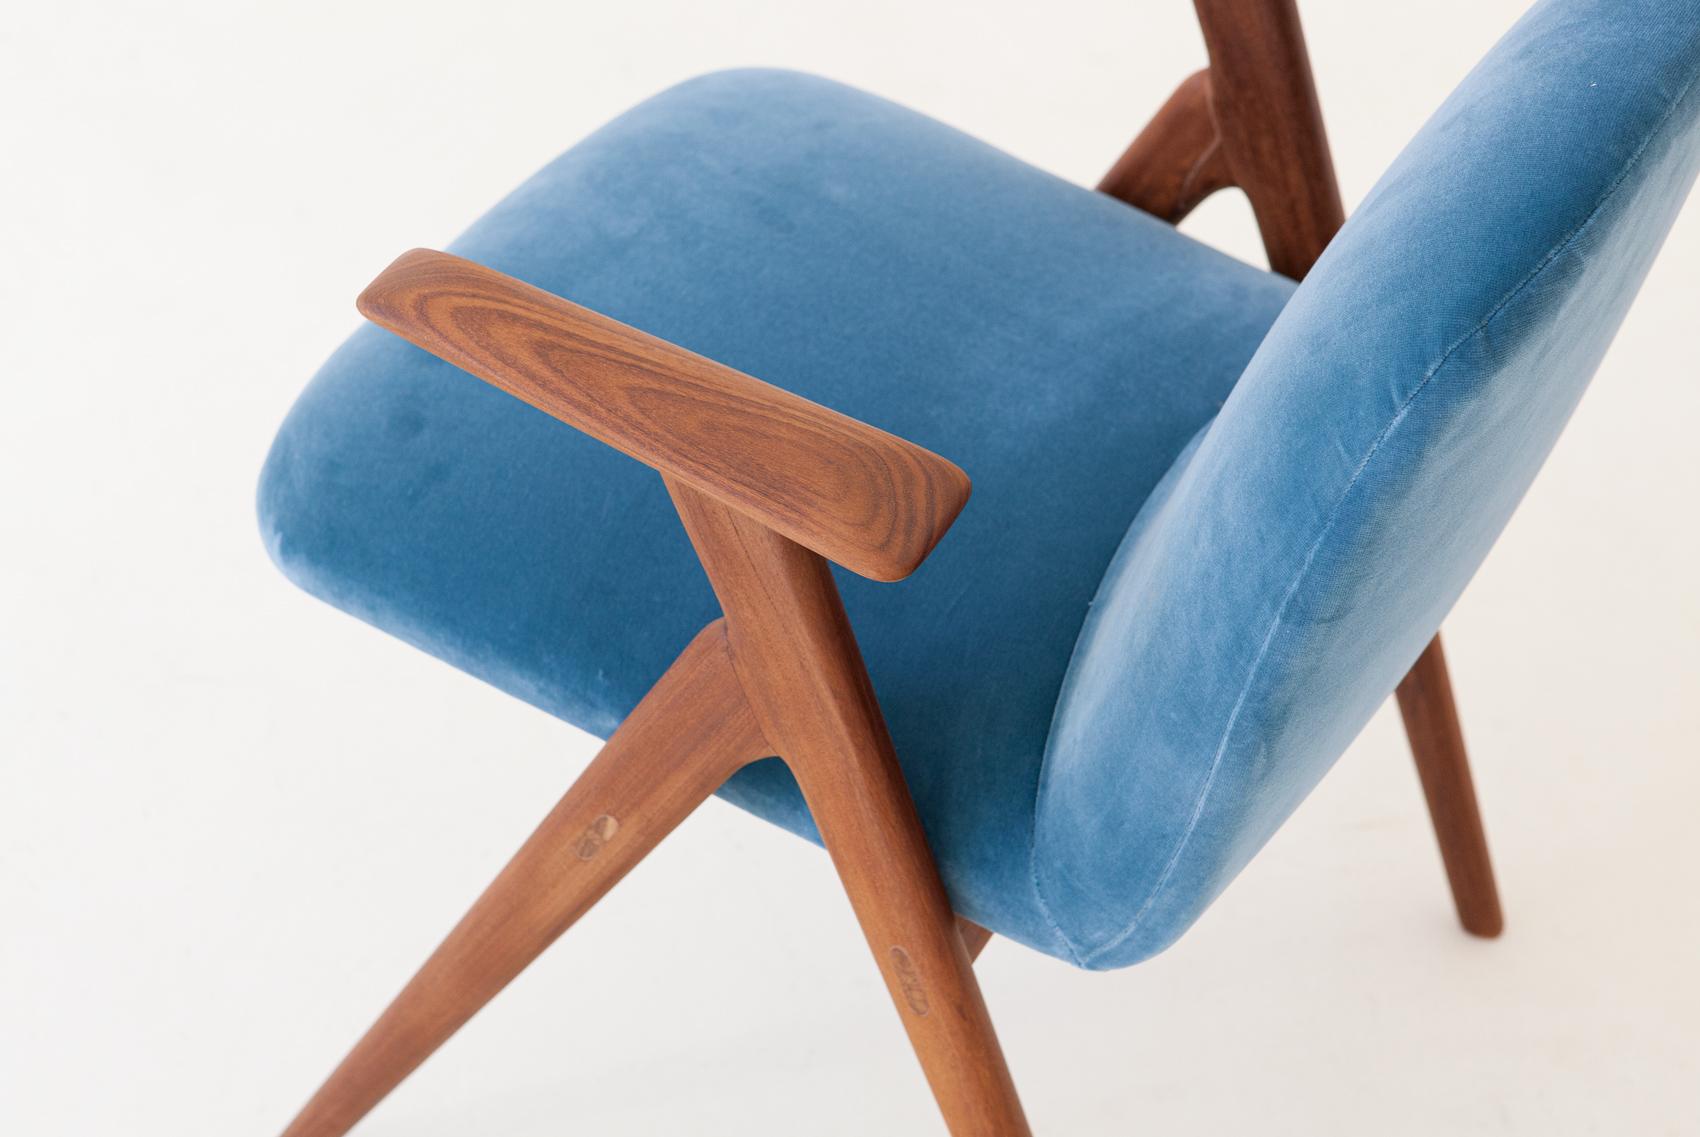 Italian Mid-Century Modern easy chairs in solid teak and light blue velvet upholstery.

Very light and smooth lines for this particular chair

Completely restored: the wooden frame has been polished and finished with little shellac, the cover is